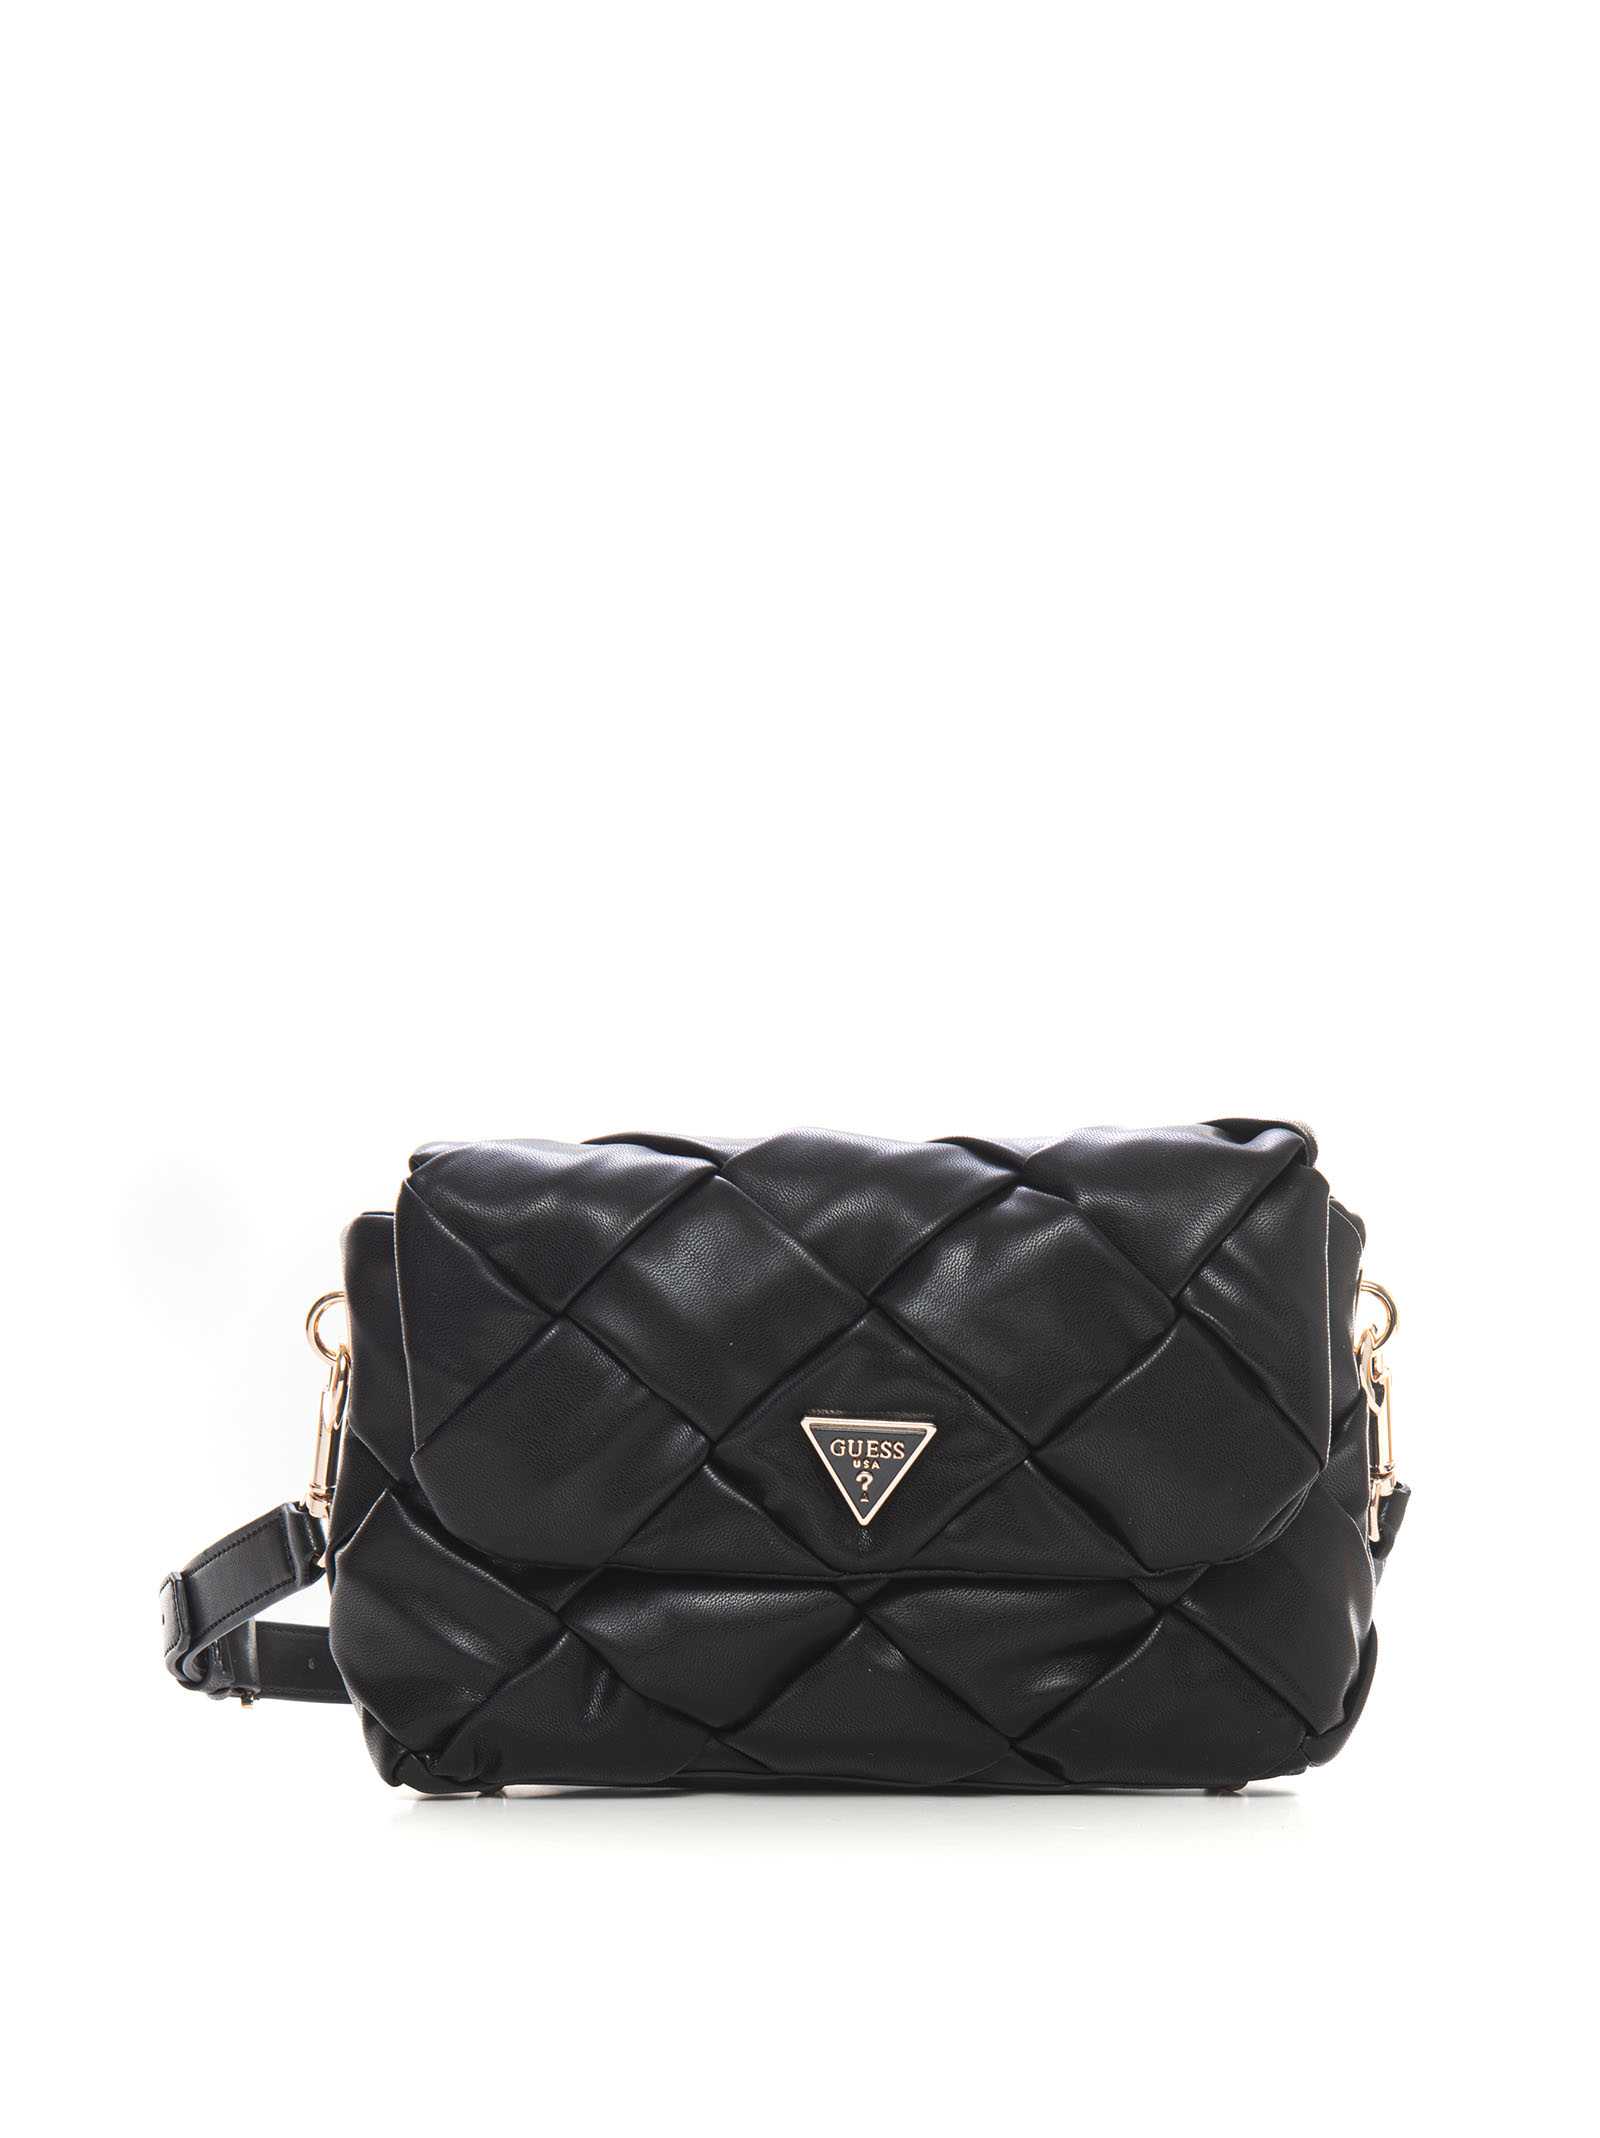 Guess Lolli Quilted Mini Crossbody Double Zip Bag  Guess handbags, Guess  bags, Black leather crossbody bag